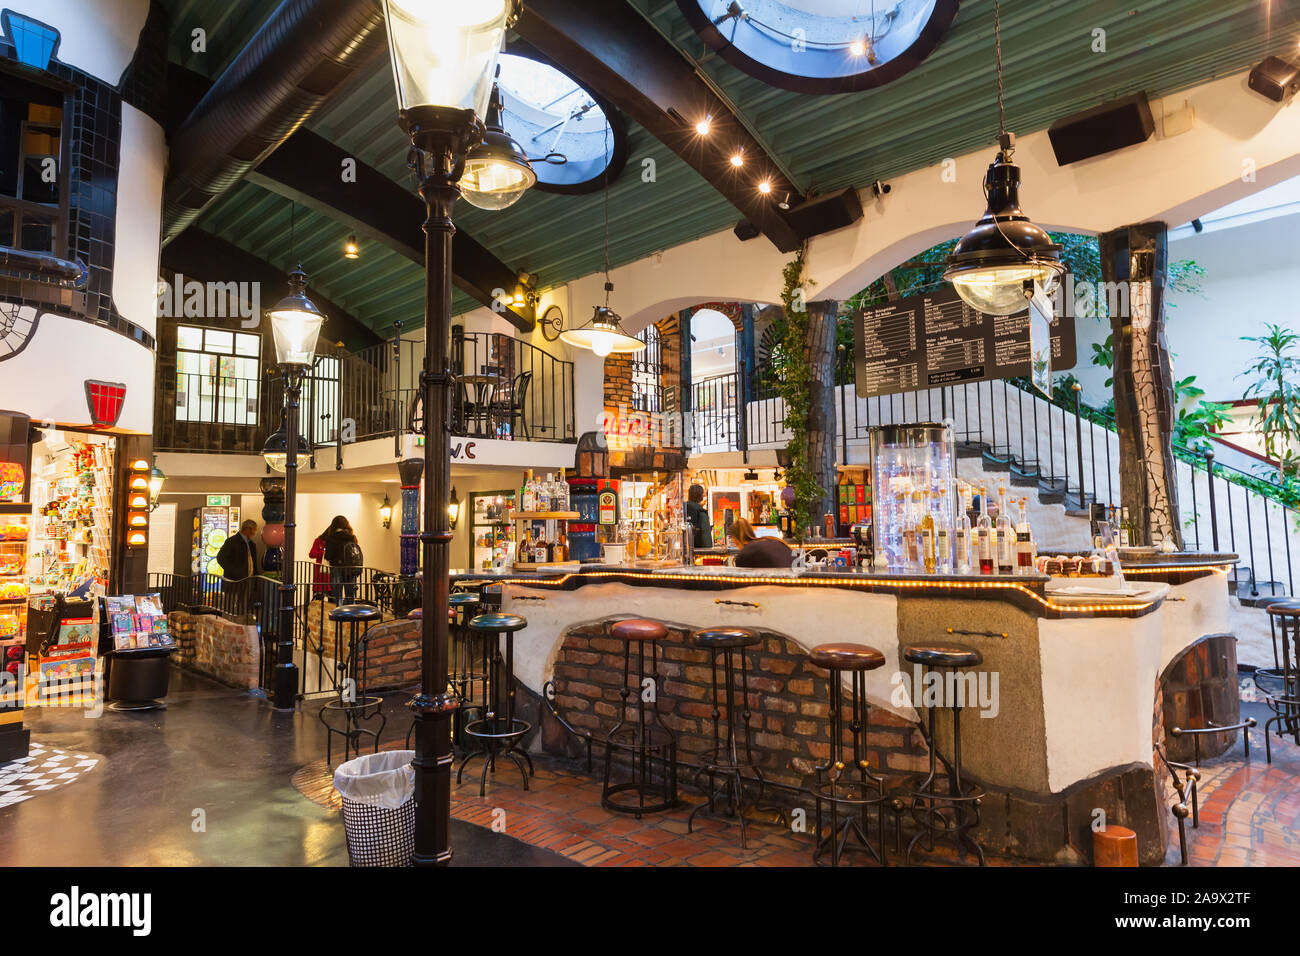 Vienna, Austria - November 1, 2015: The Hundertwasser Village cafe area was built both on the inside and the exterior by concepts of artist Friedensre Stock Photo